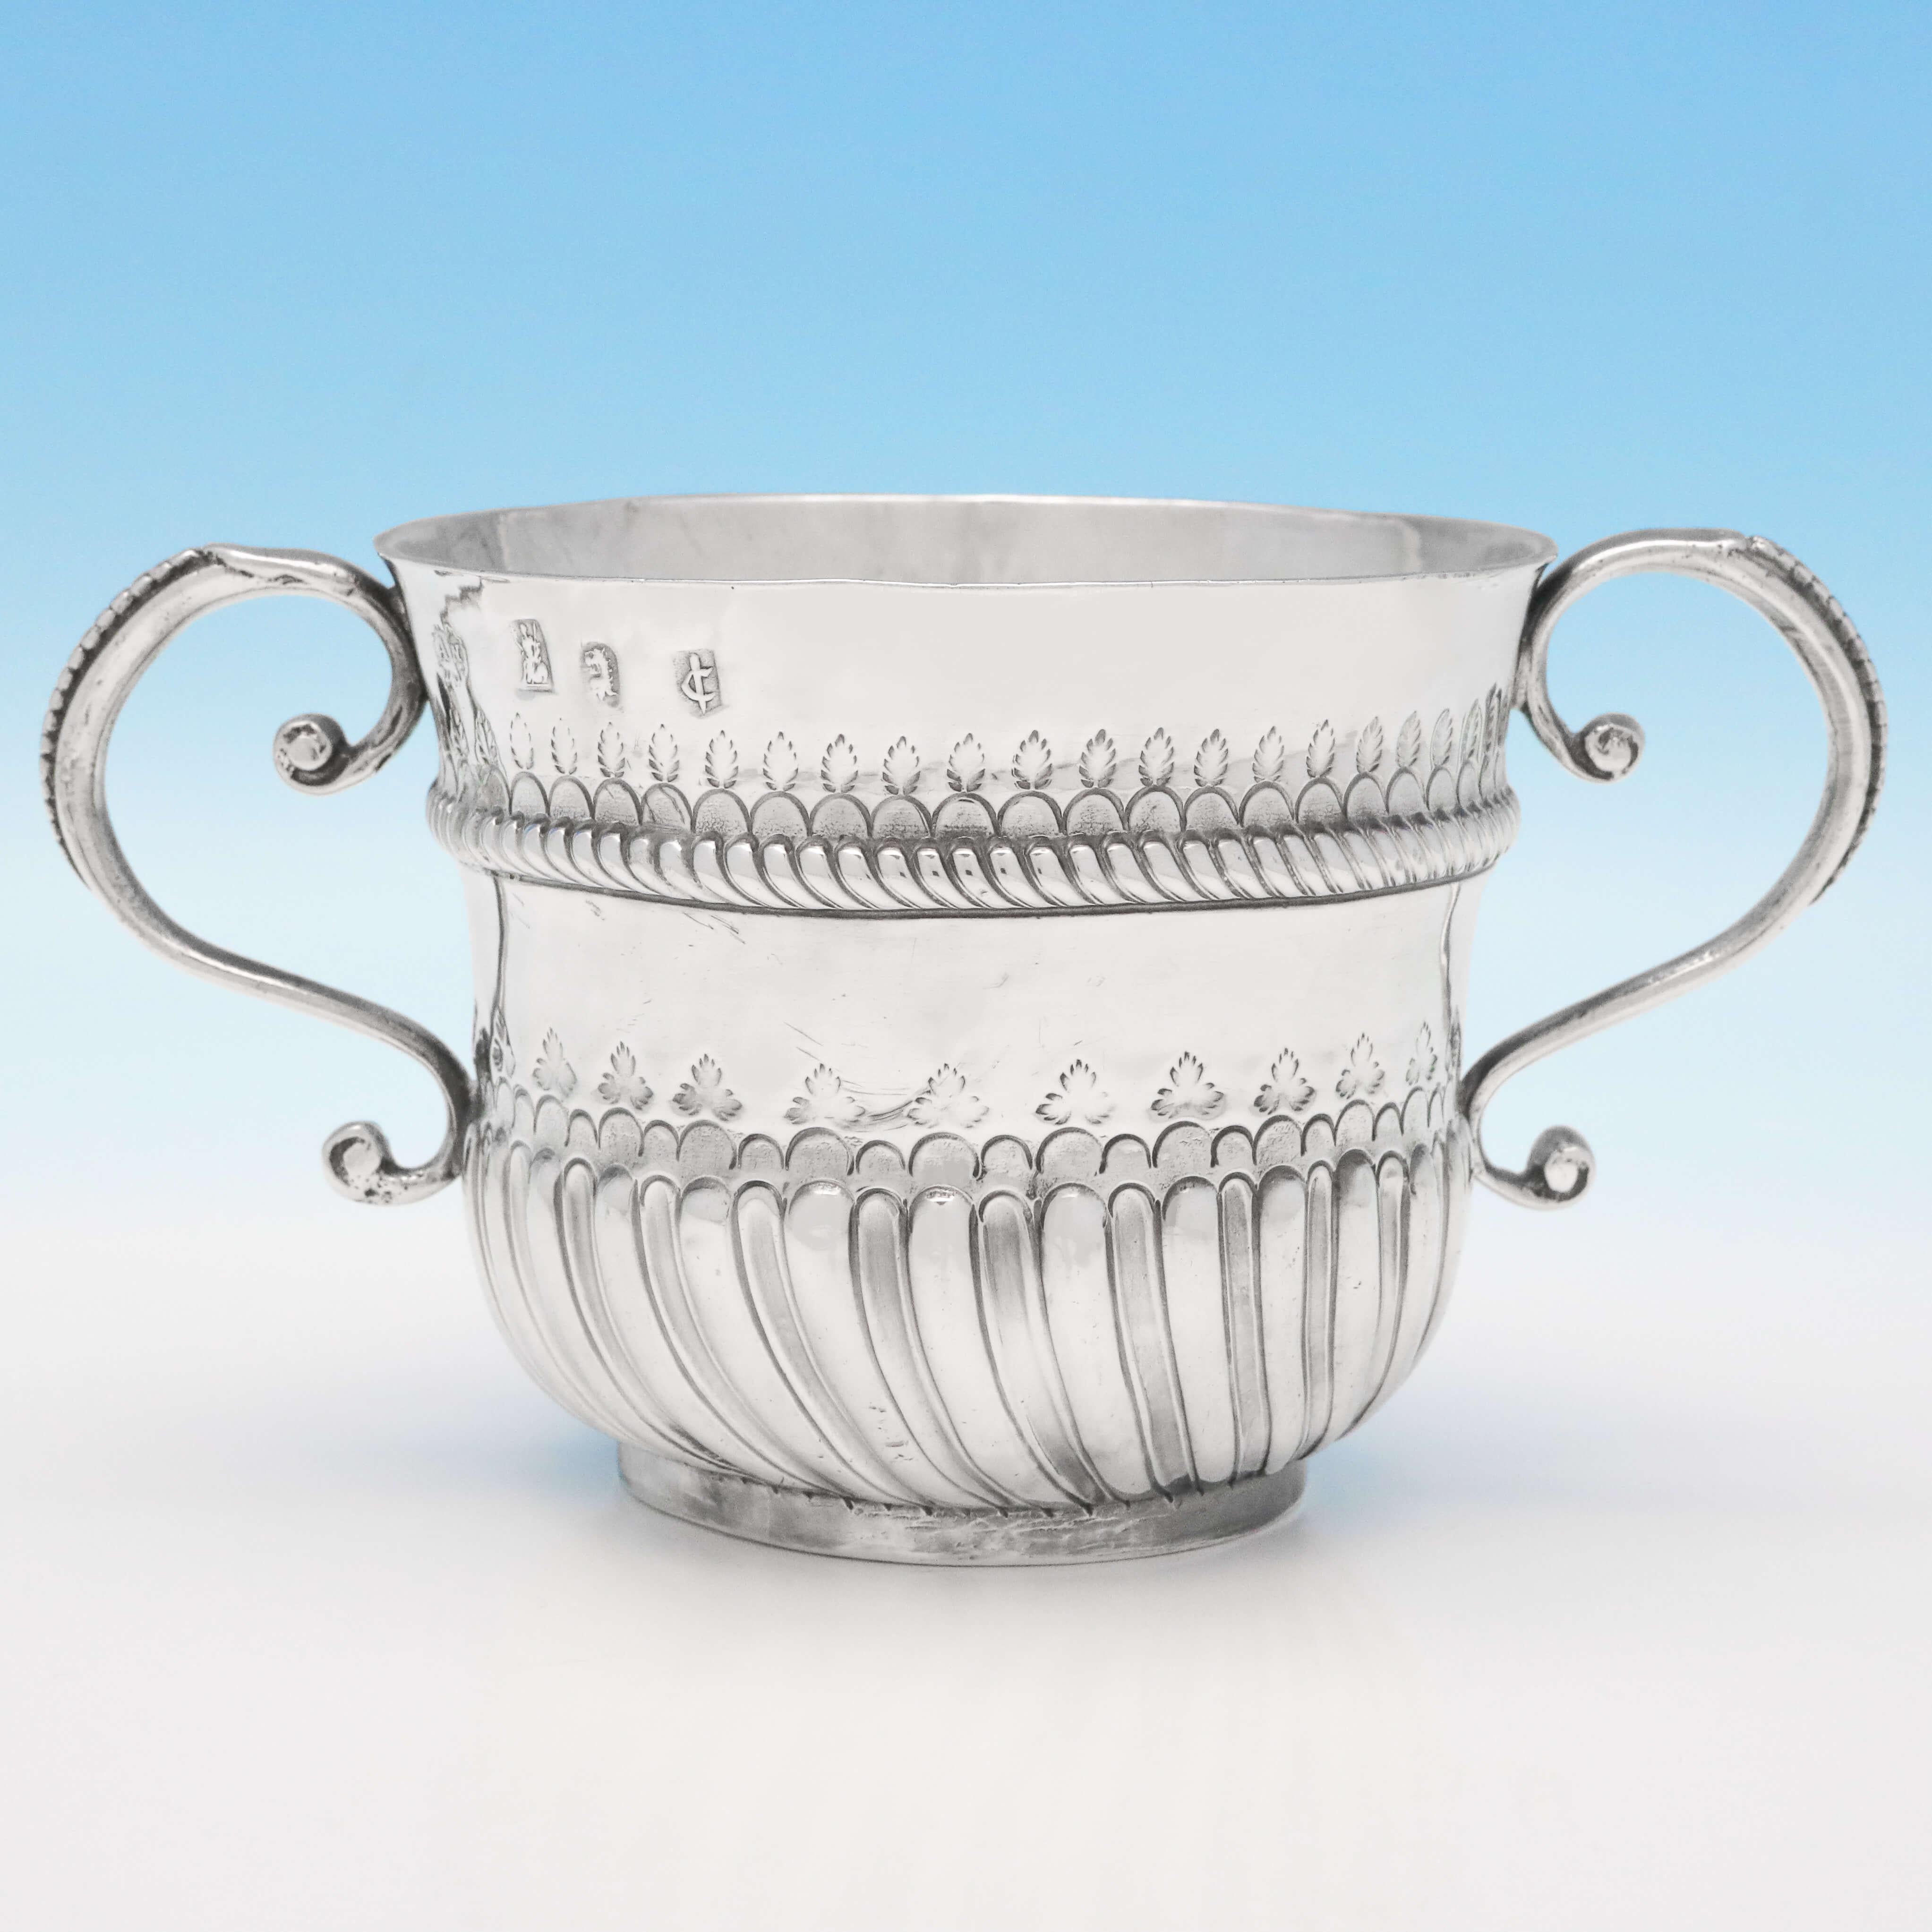 Hallmarked in London in 1698 by William Andrews, this exemplary, William & Mary Period, antique Brittania standard silver porringer, is in the traditional form, and is engraved with initials to one side (M.P). The porringer measures 3.5